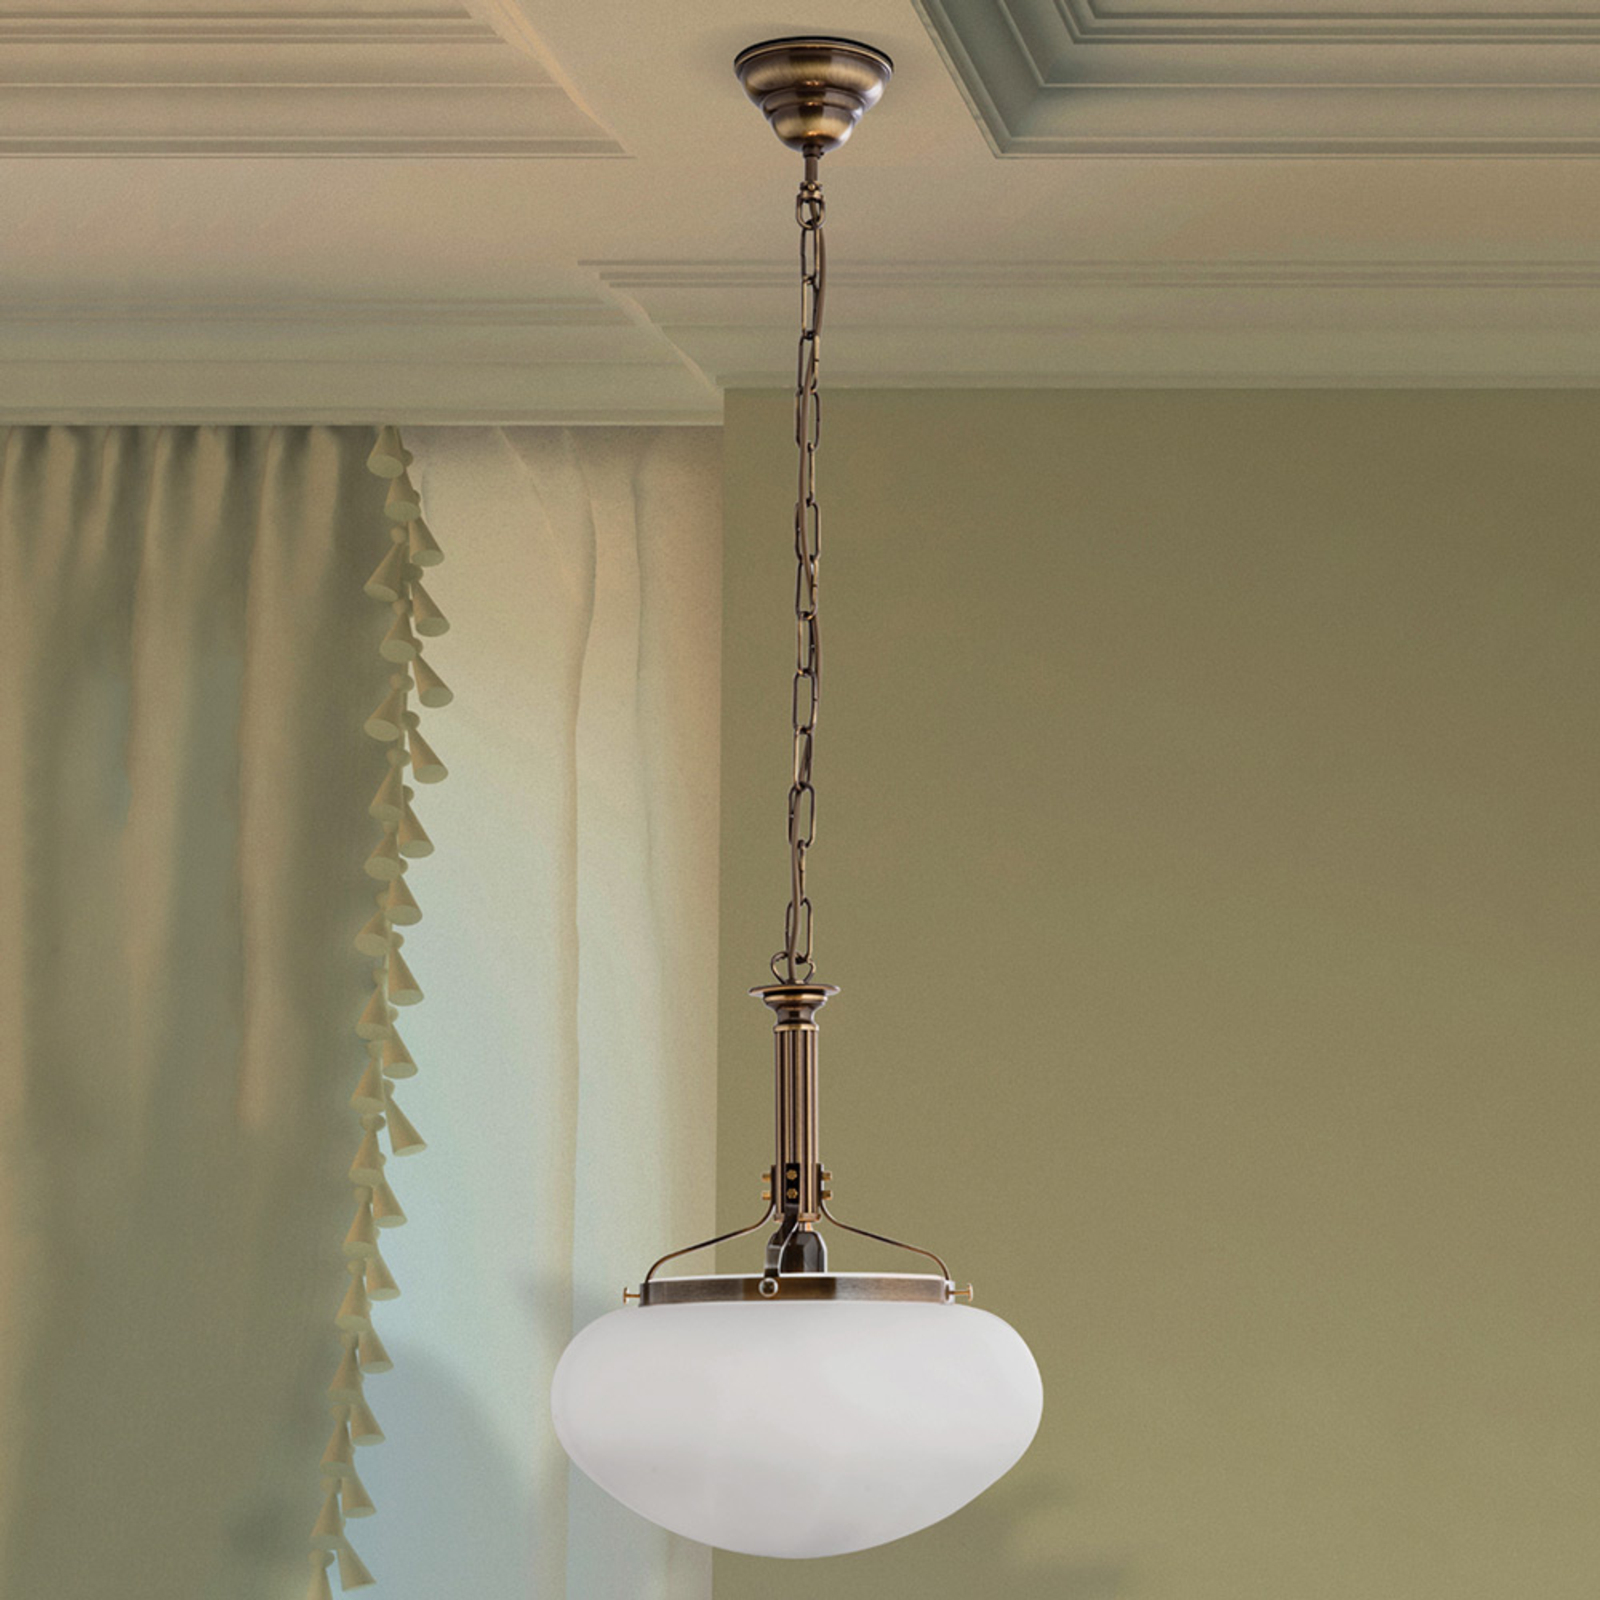 Delia hanging light in antique brass, one-bulb